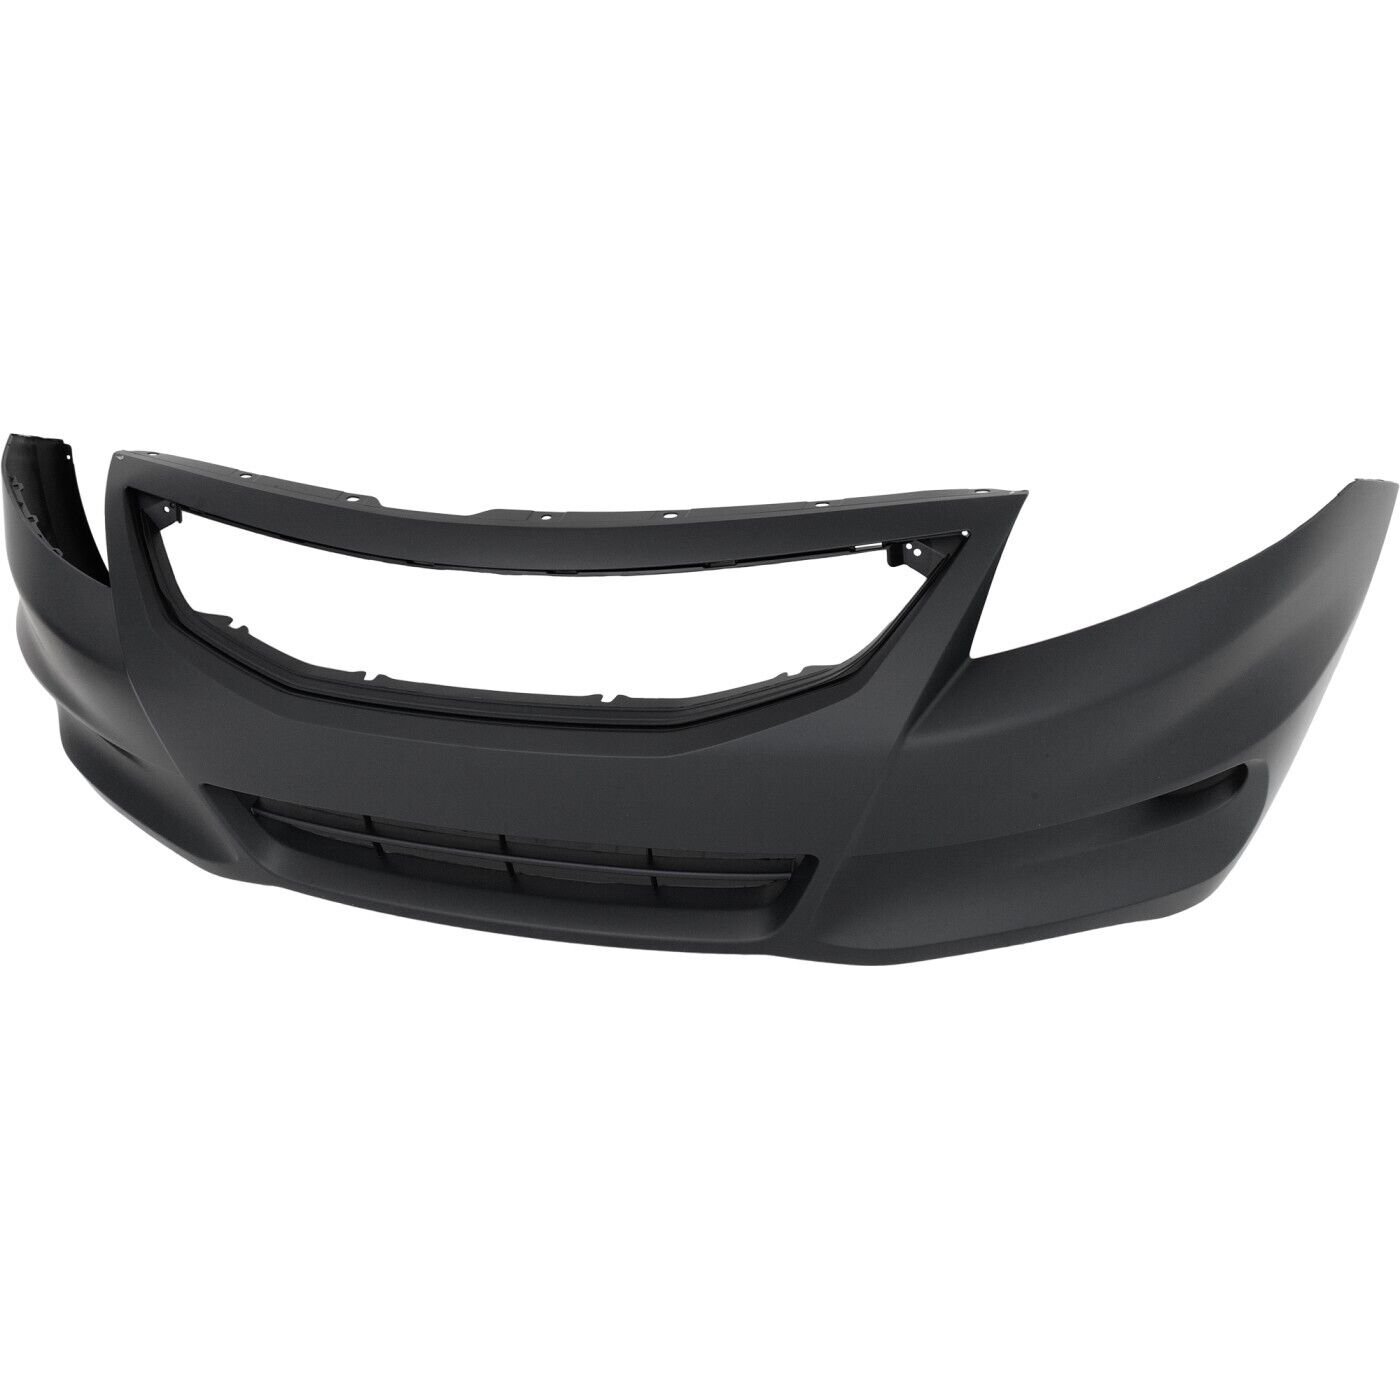 Front Bumper Cover For 2011-2012 Honda Accord Coupe w/ fog lamp holes Primed